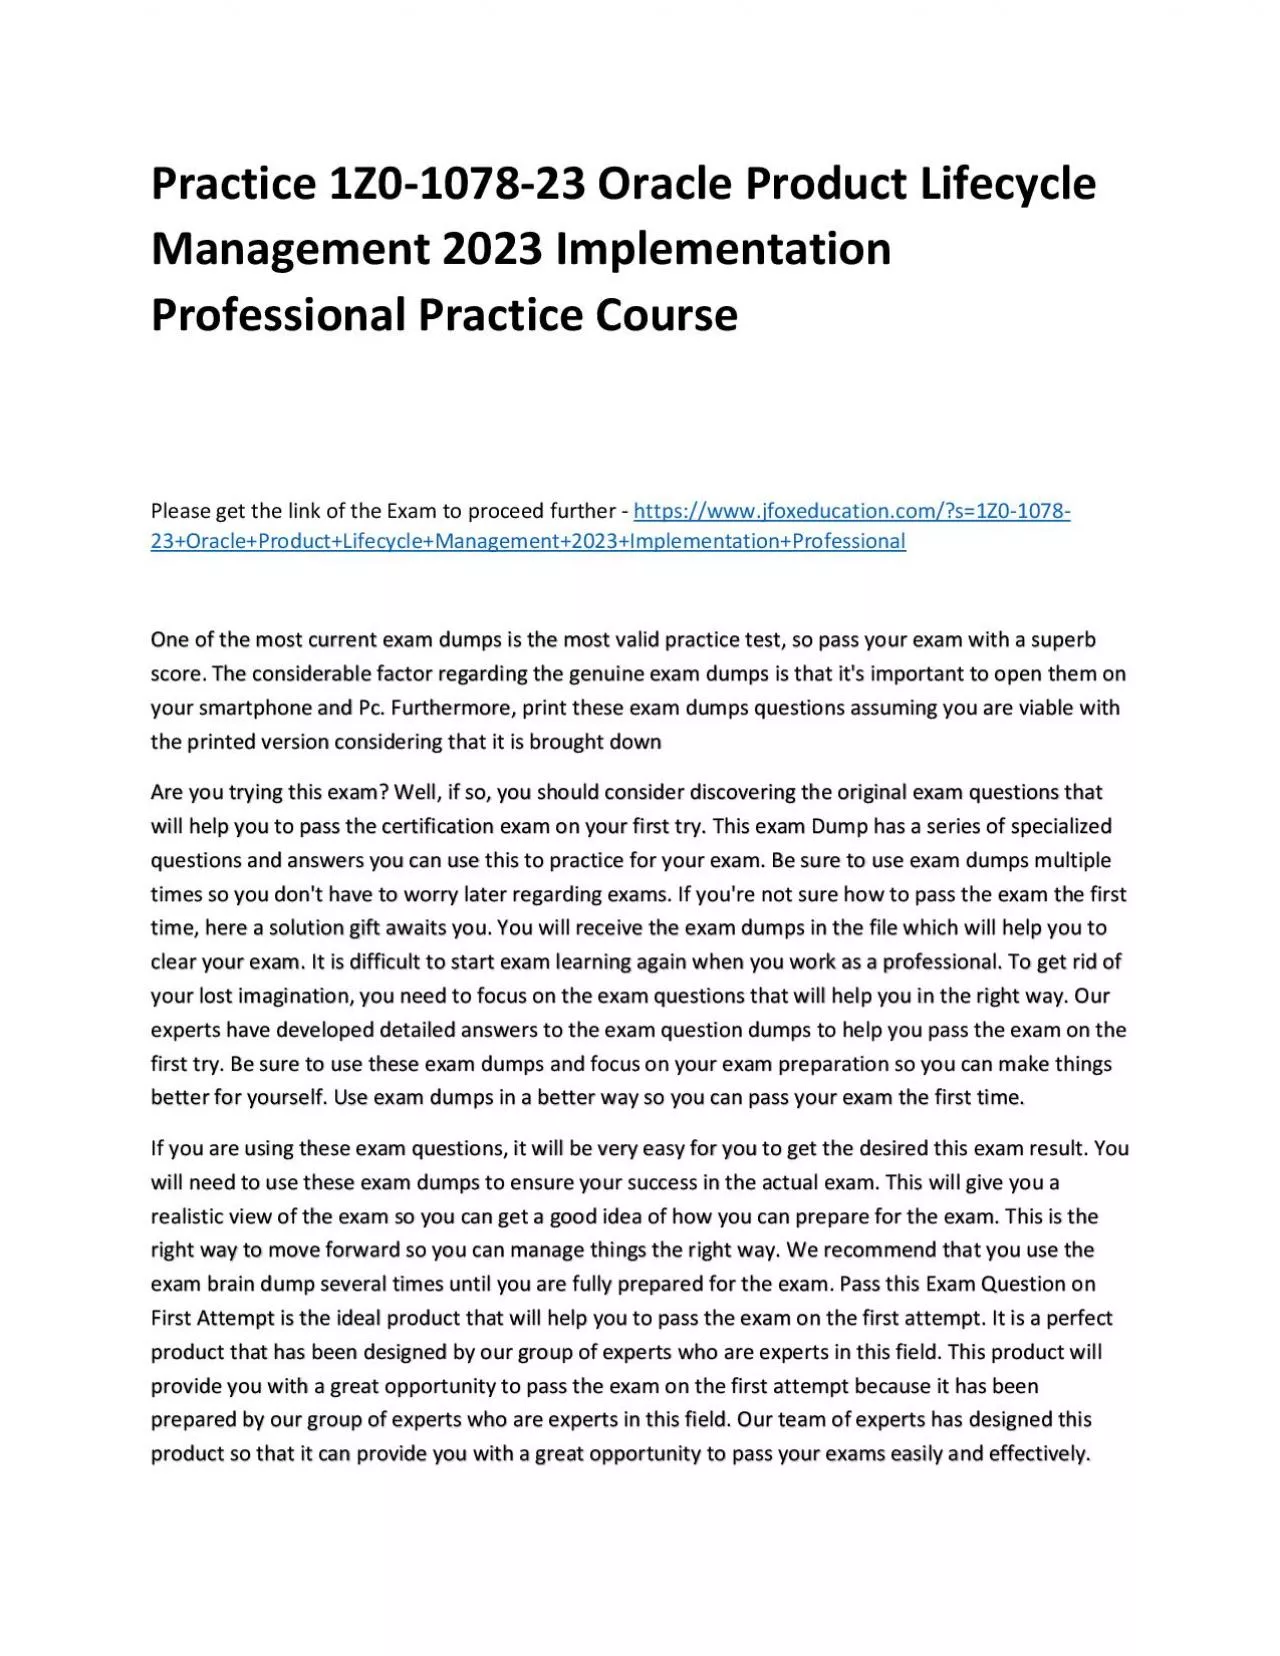 Practice 1Z0-1078-23 Oracle Product Lifecycle Management 2023 Implementation Professional